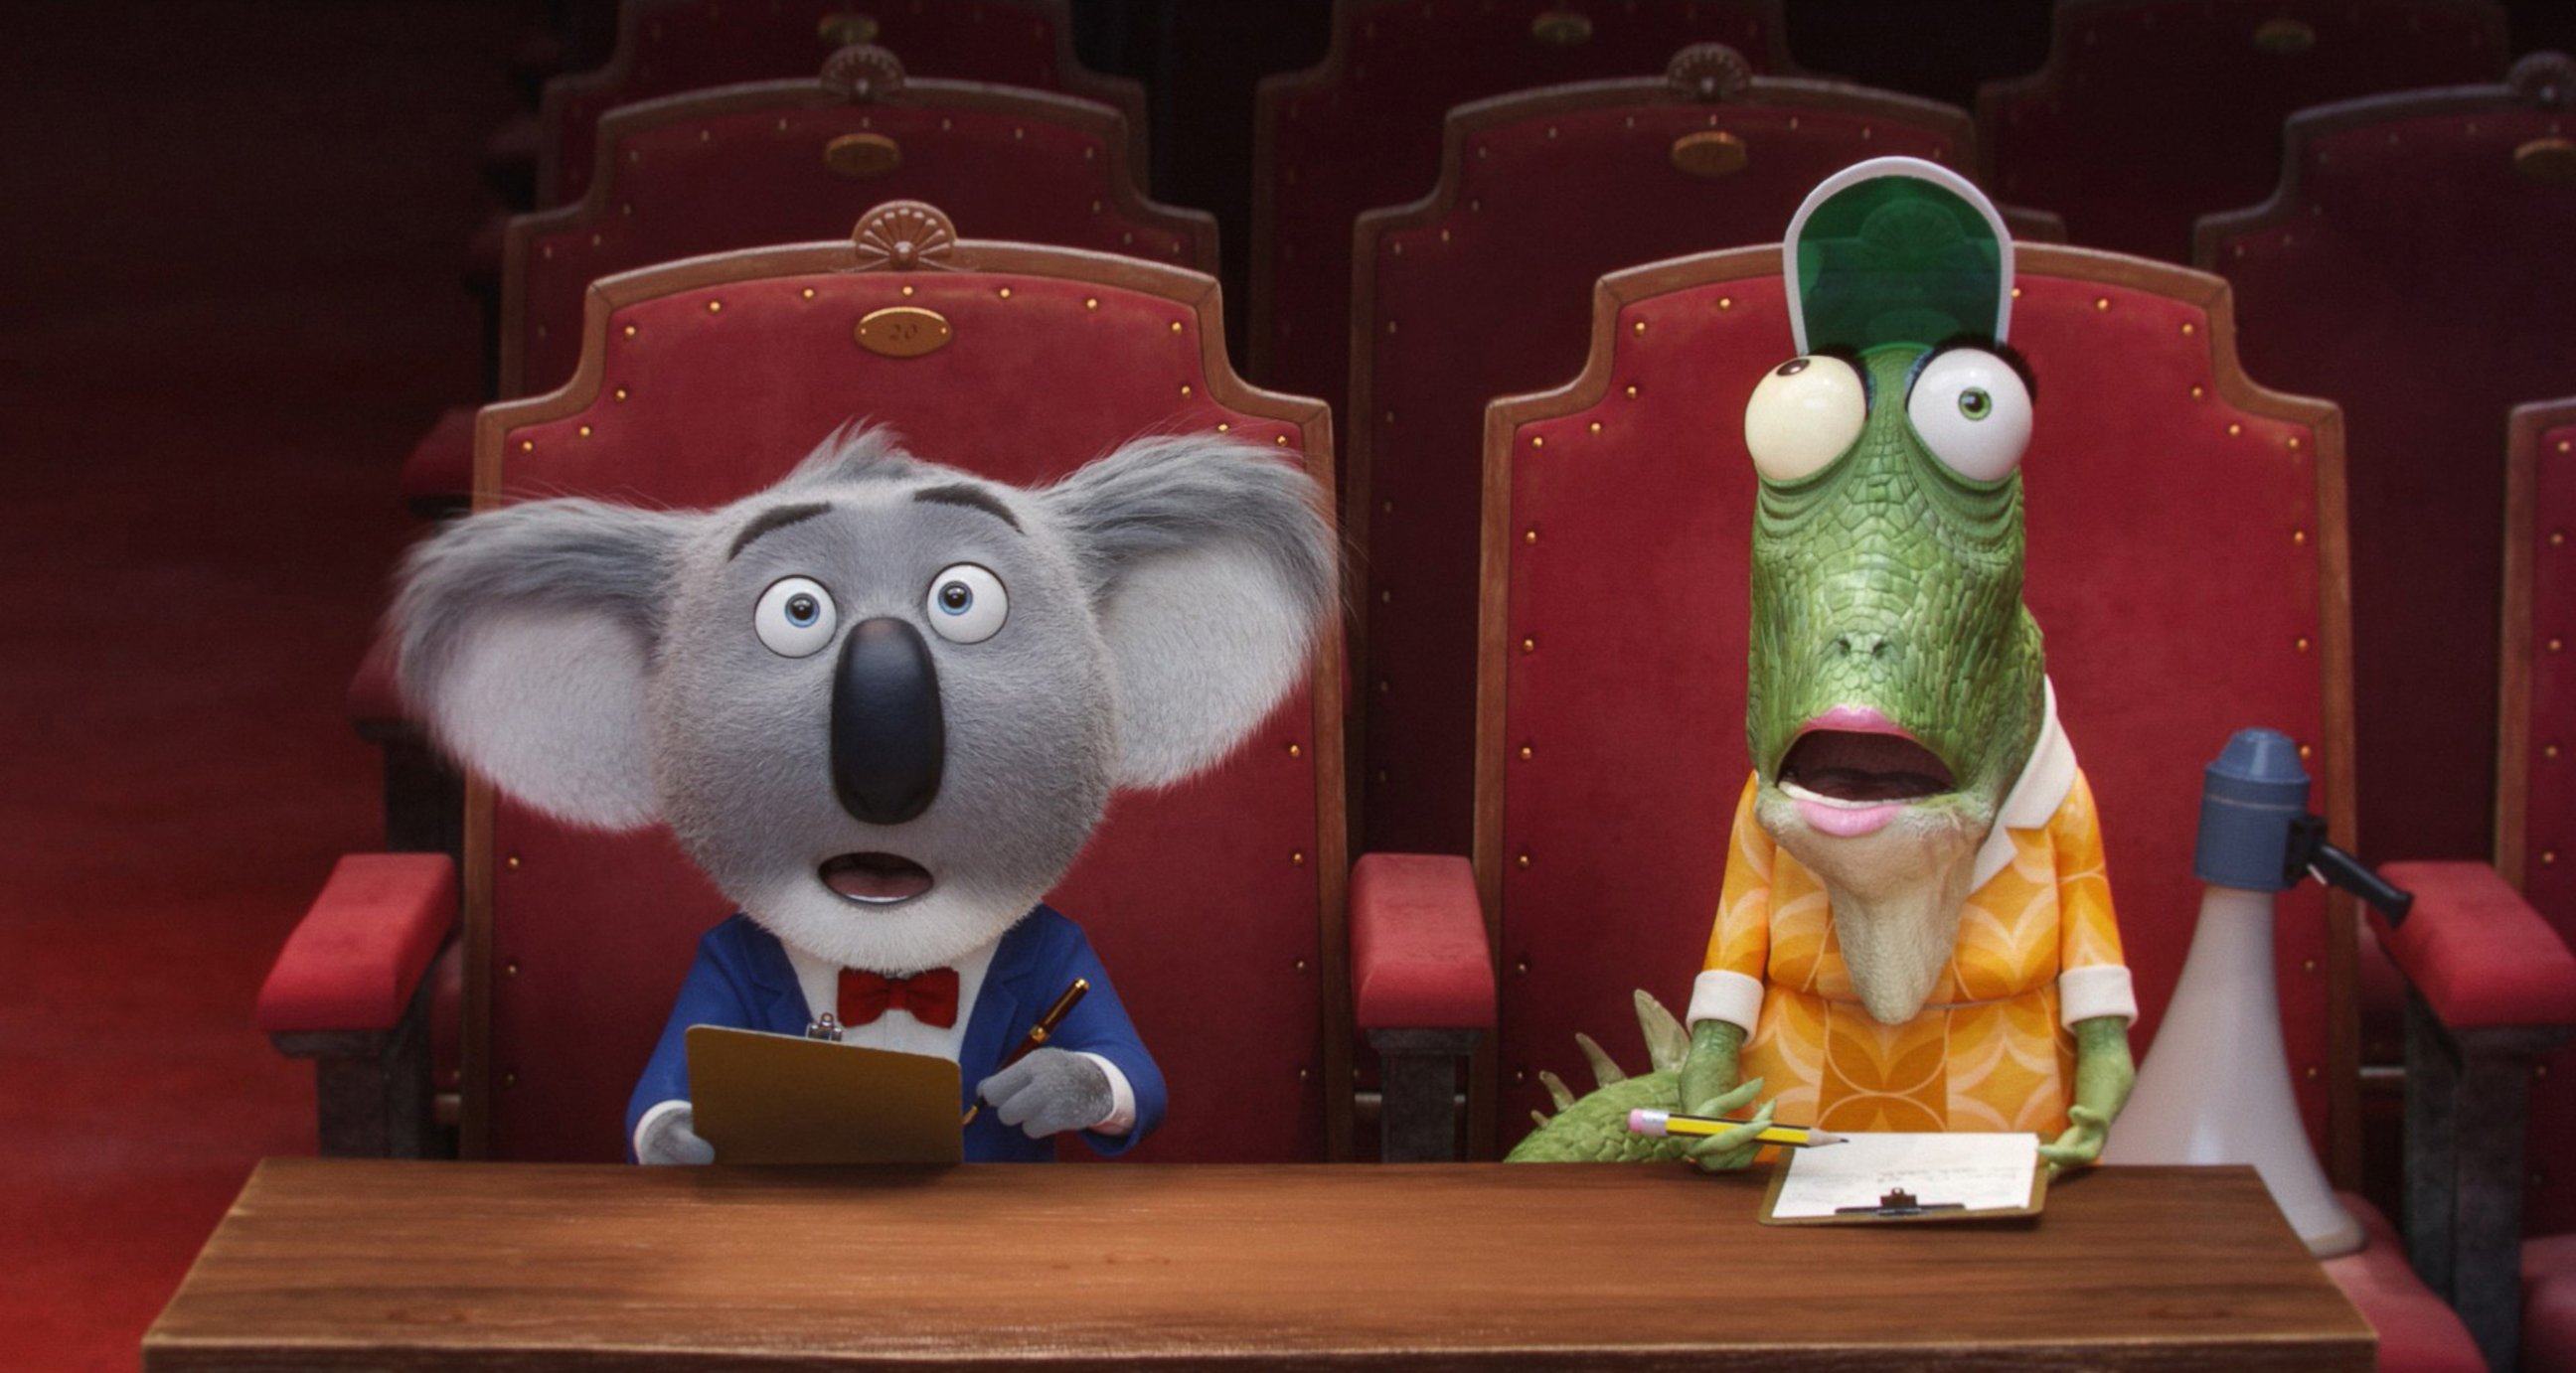 PHOTO: Matthew McConaughey stars as, dapper Koala Buster Moon, and director Garth Jennings, voices elderly lizard Miss Crawly, in "Sing," a musical comedy about finding the shining star that lives inside all of us.